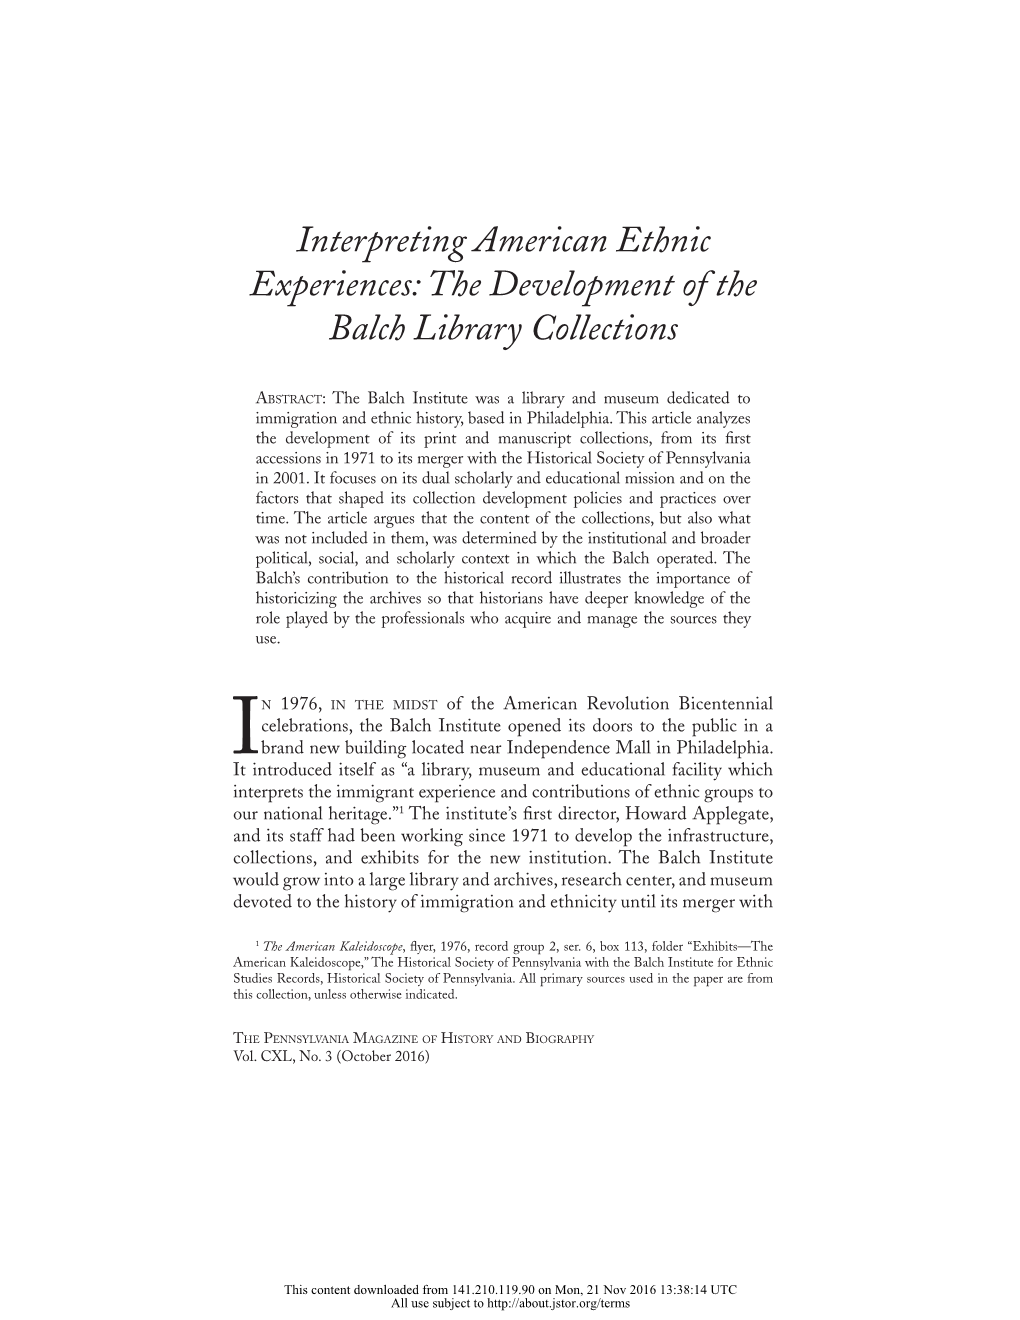 Interpreting American Ethnic Experiences: the Development of the Balch Library Collections